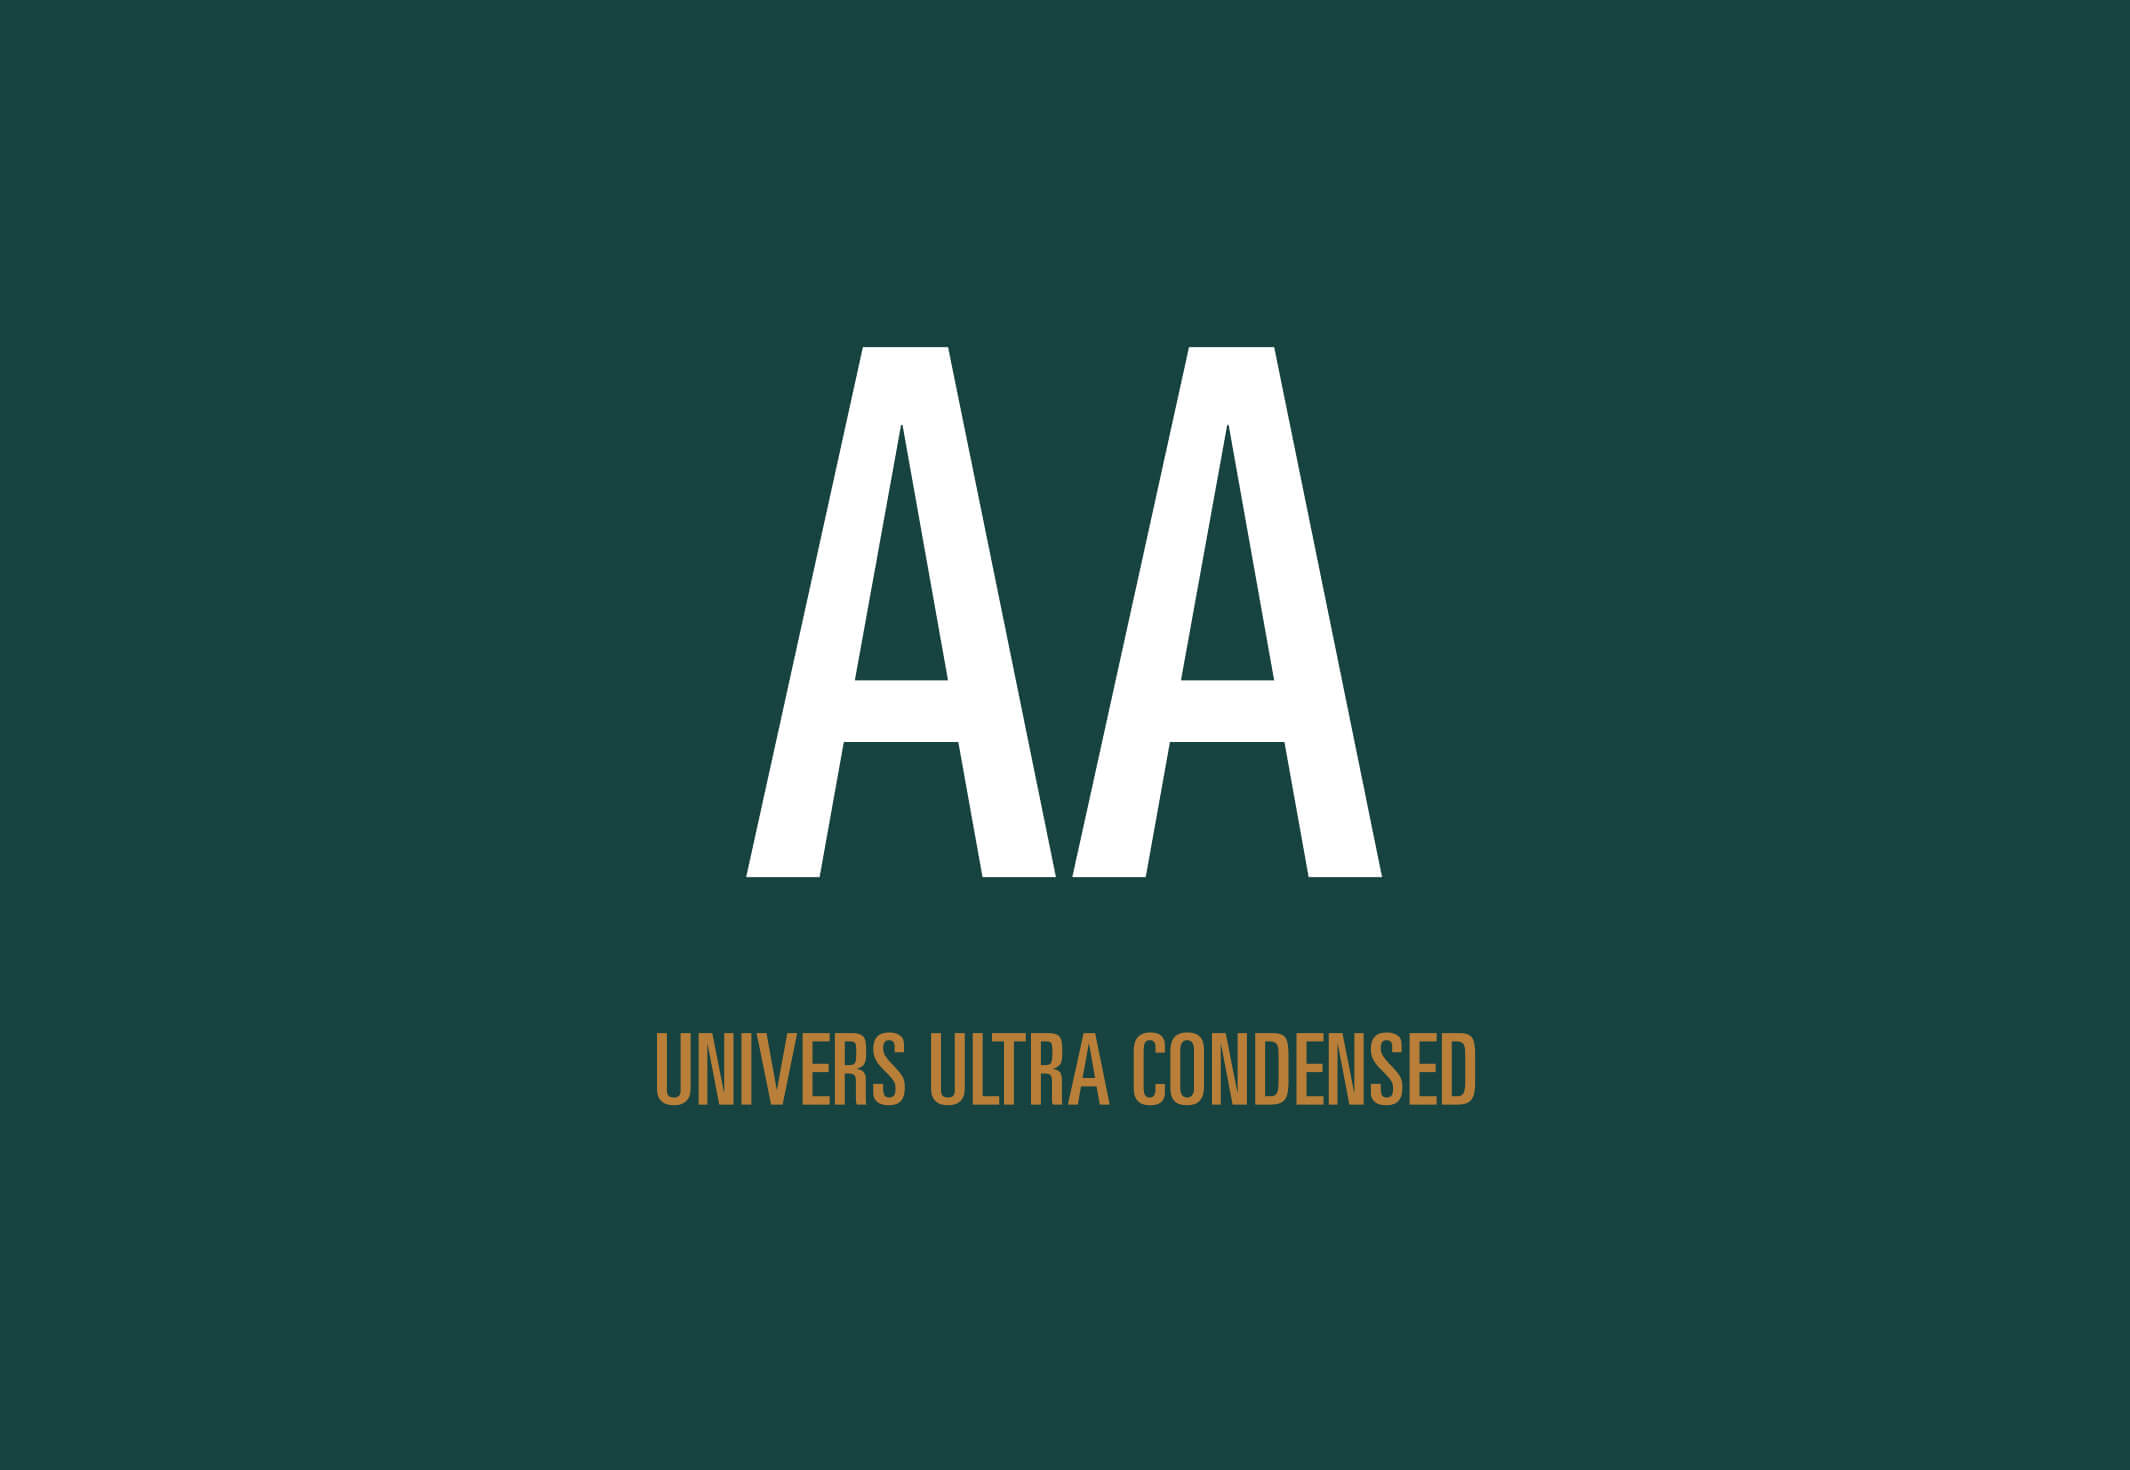 A letterform of the letter A for the font Univers Ultra Condensed.